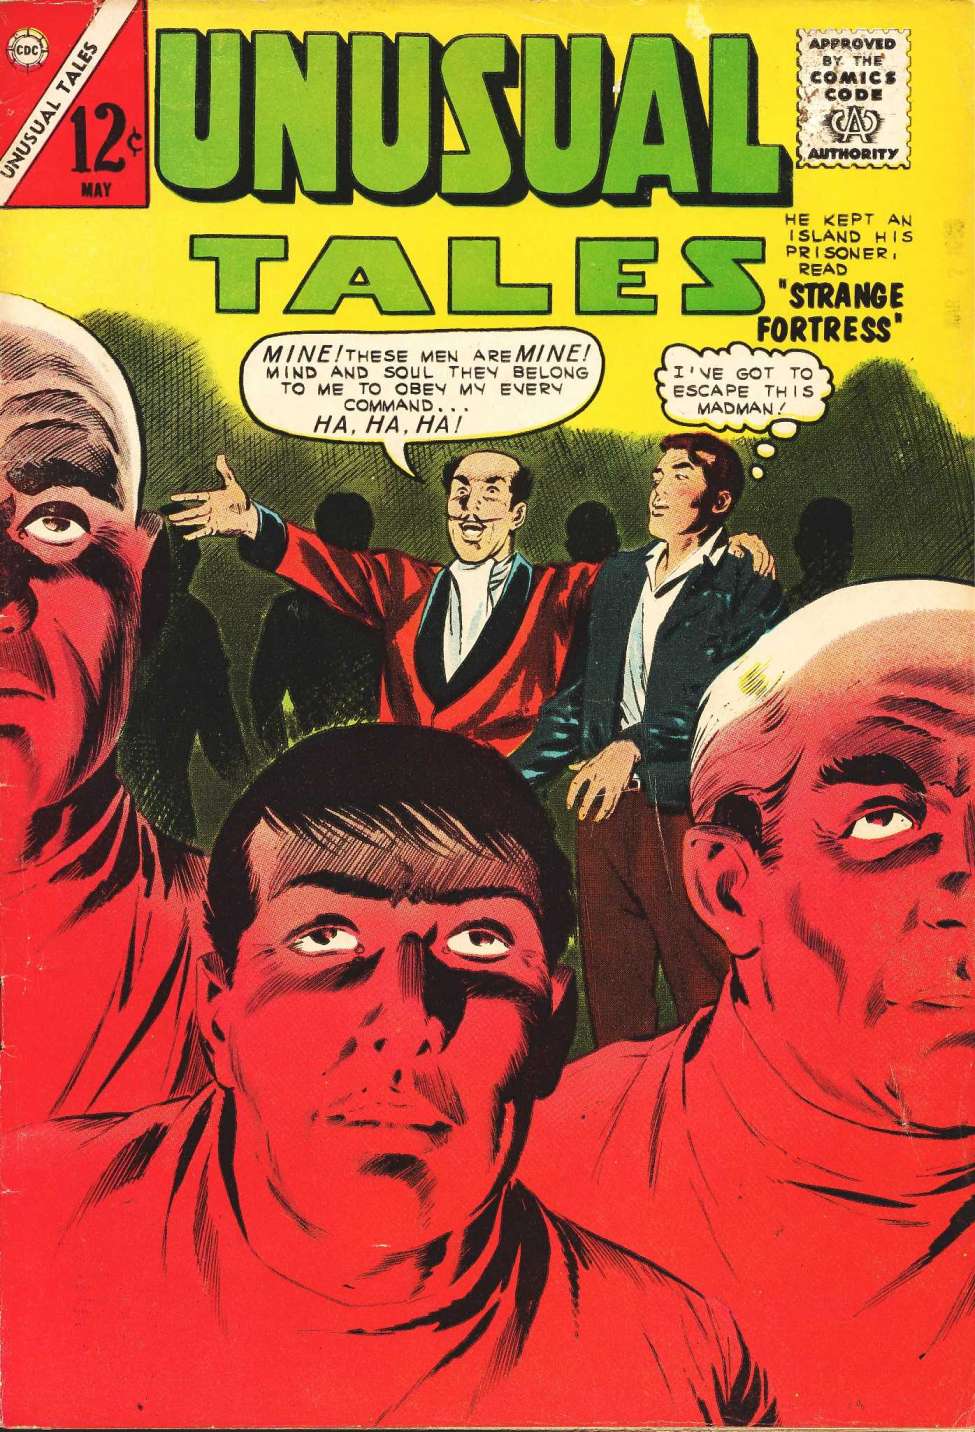 Comic Book Cover For Unusual Tales 39 - Version 1